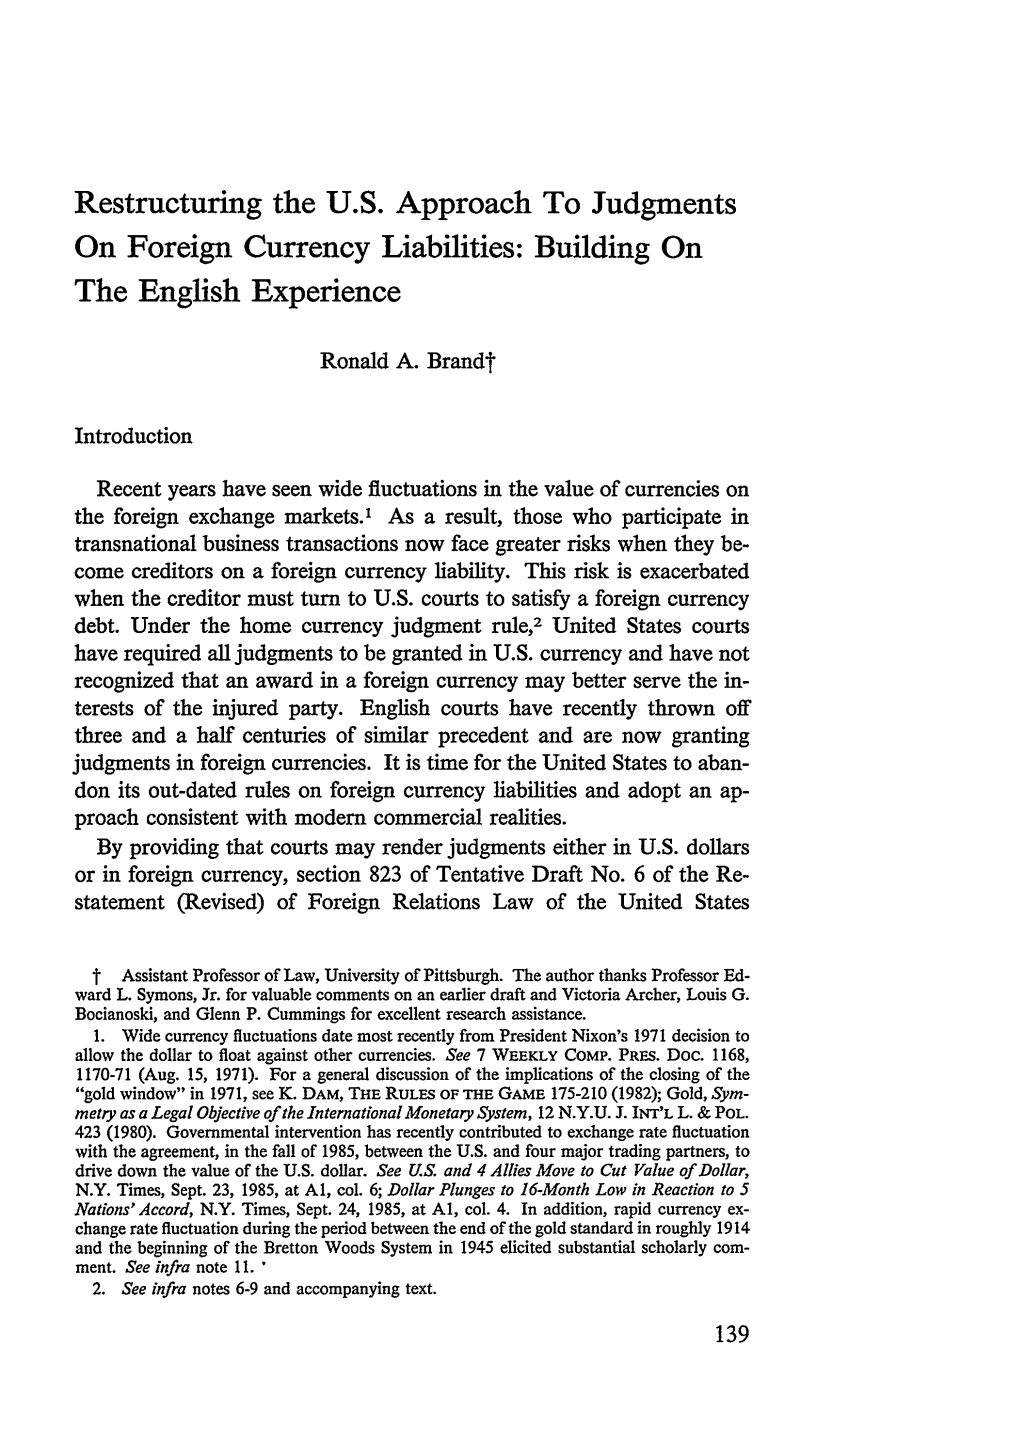 Restructuring the U.S. Approach to Judgments on Foreign Currency Liabilities: Building on the English Experience